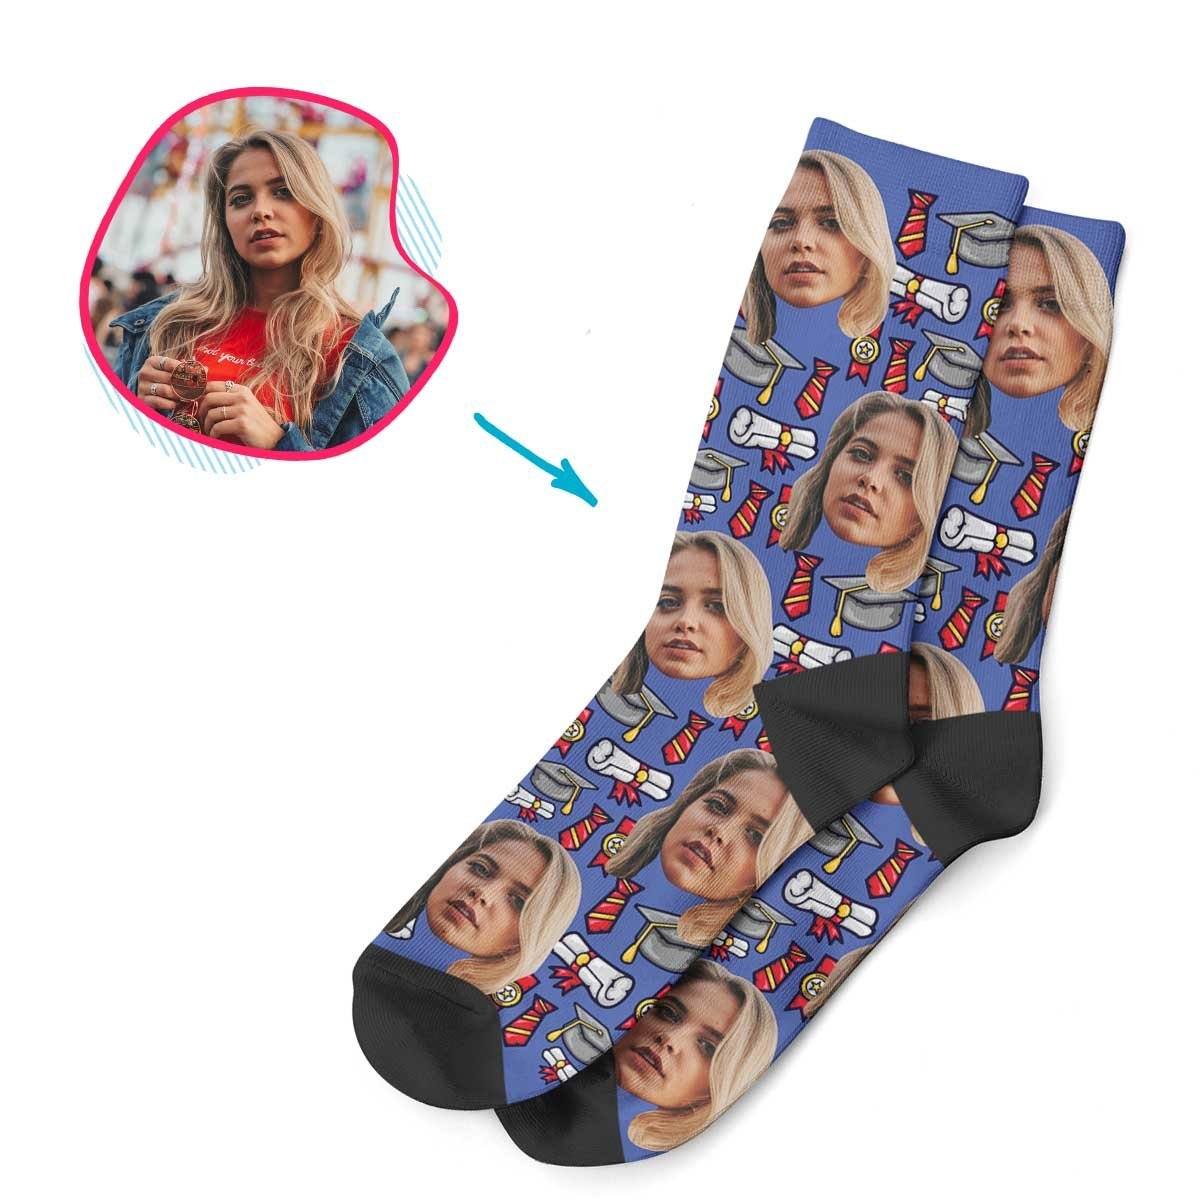 Darkblue Students & Graduates personalized socks with photo of face printed on them